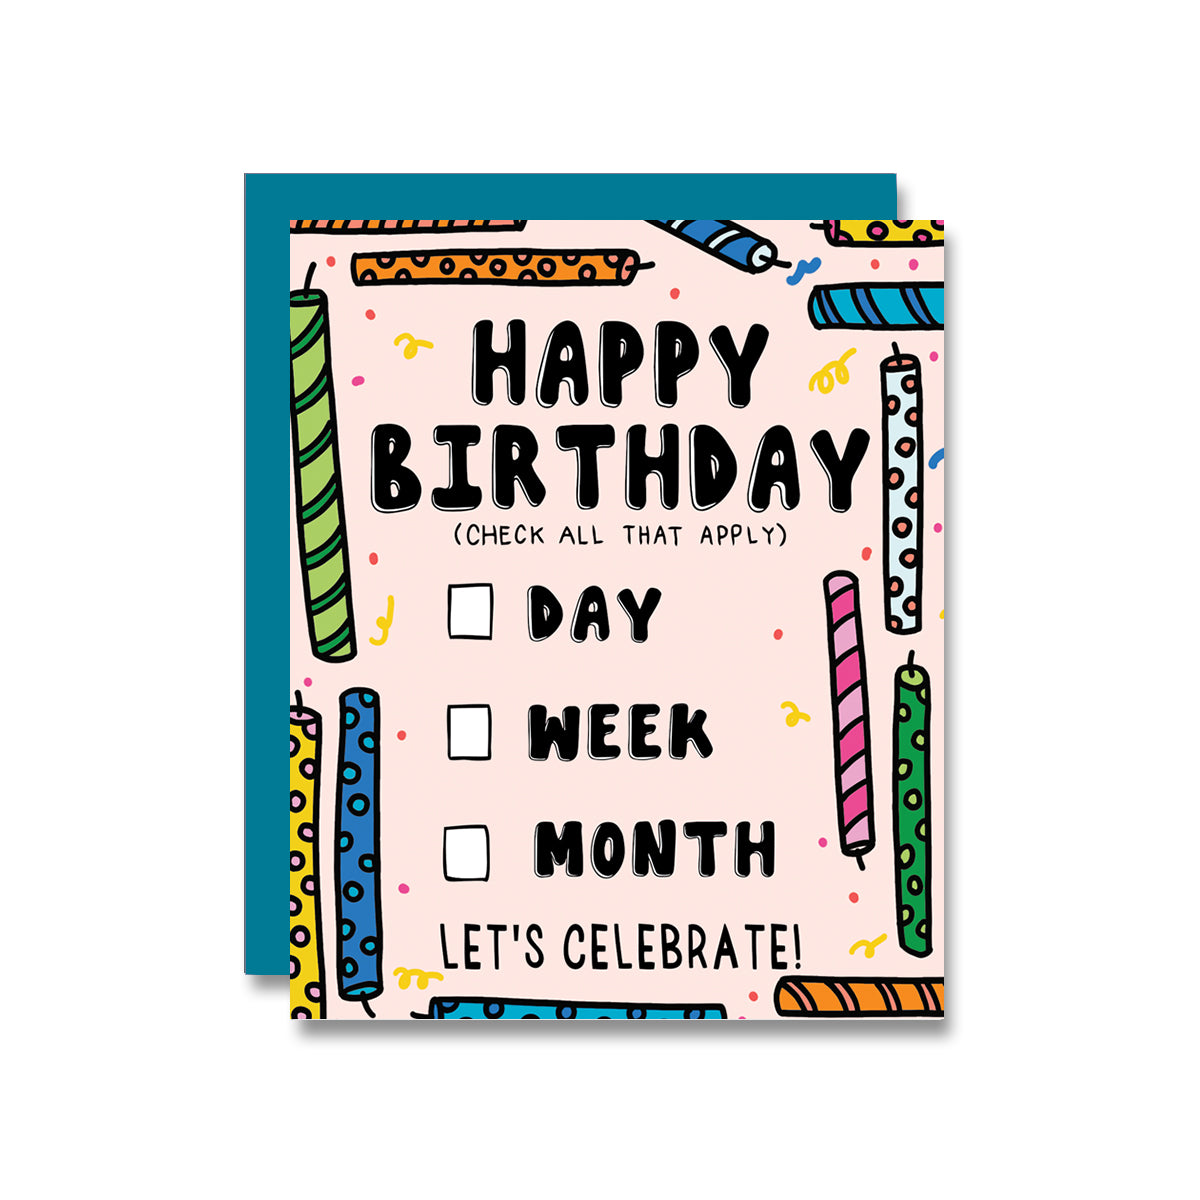 Buy Wholesale Happy Birthday Day Week Month Card by ...